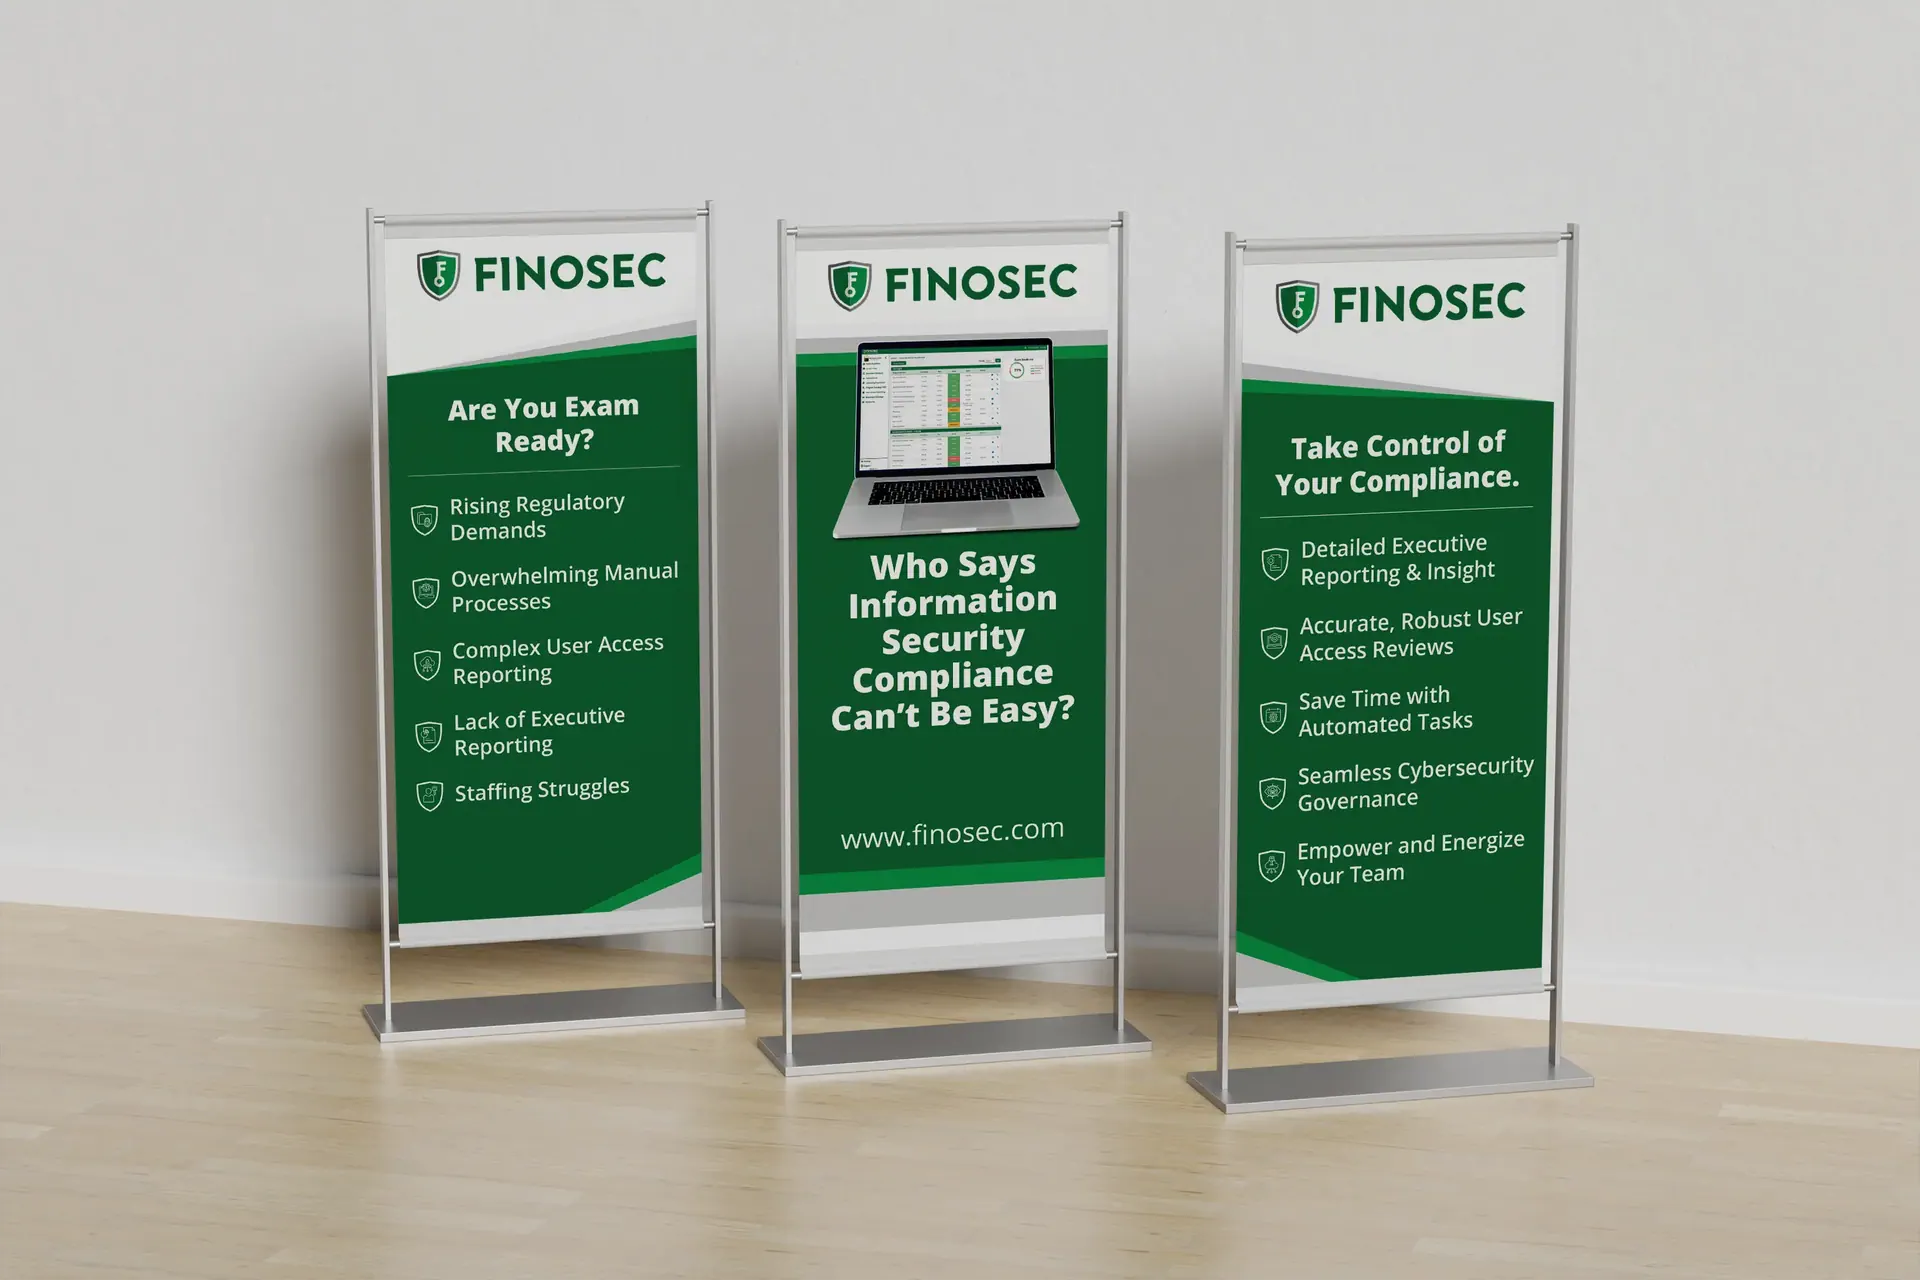 Finsosec Banners